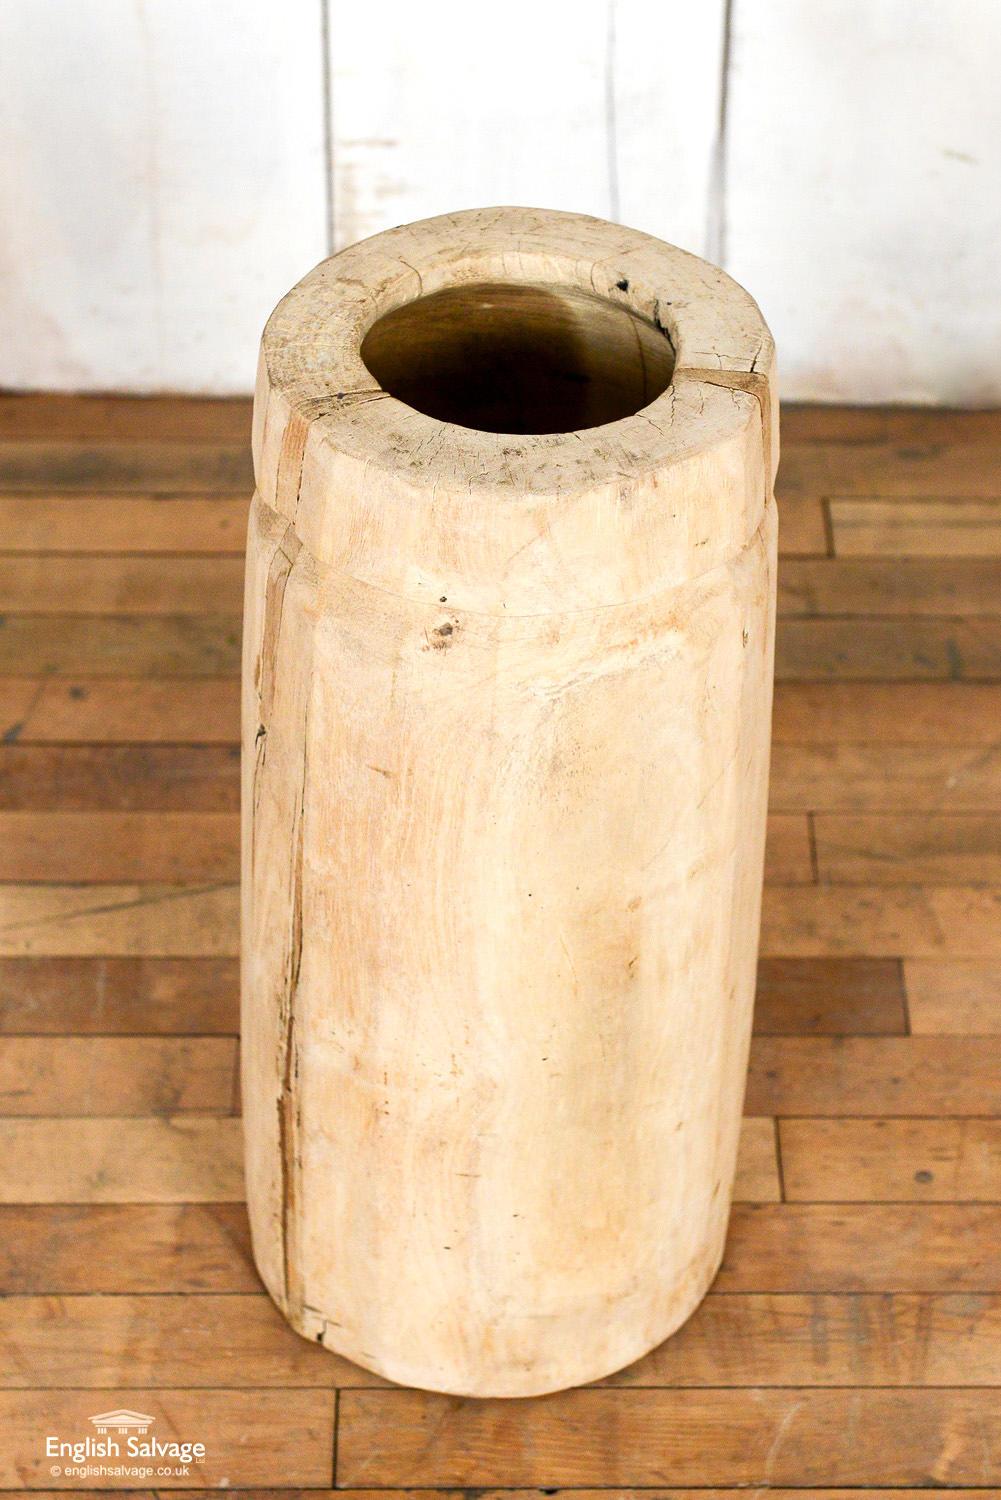 Tribal Indian hollowed out tree trunk. Would make a fantastic umbrella stand. Some splits to the wood commensurate with age.